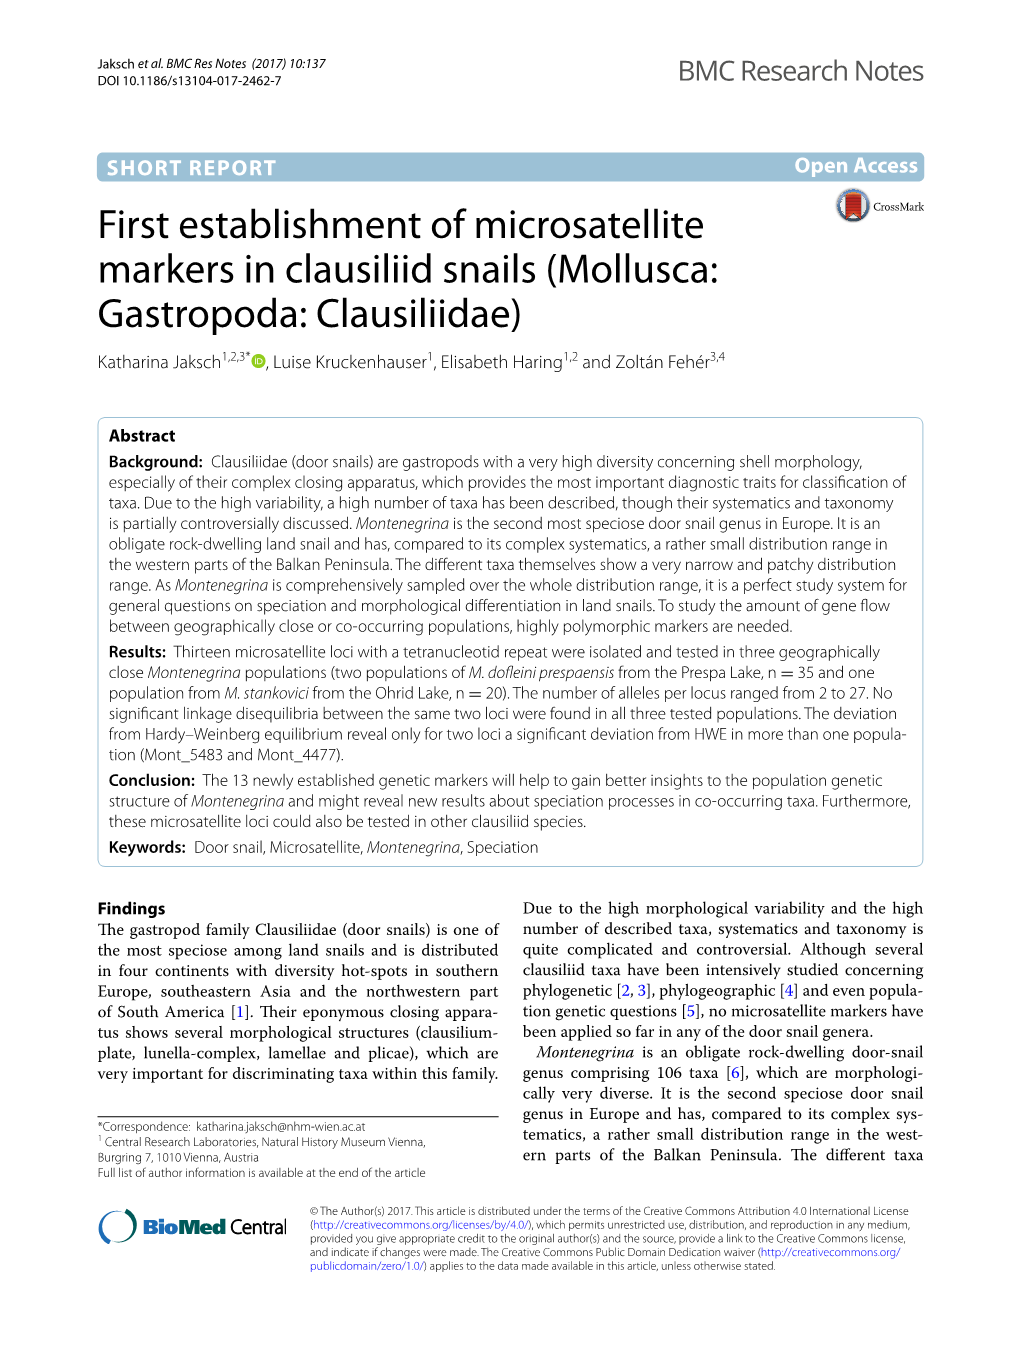 First Establishment of Microsatellite Markers in Clausiliid Snails